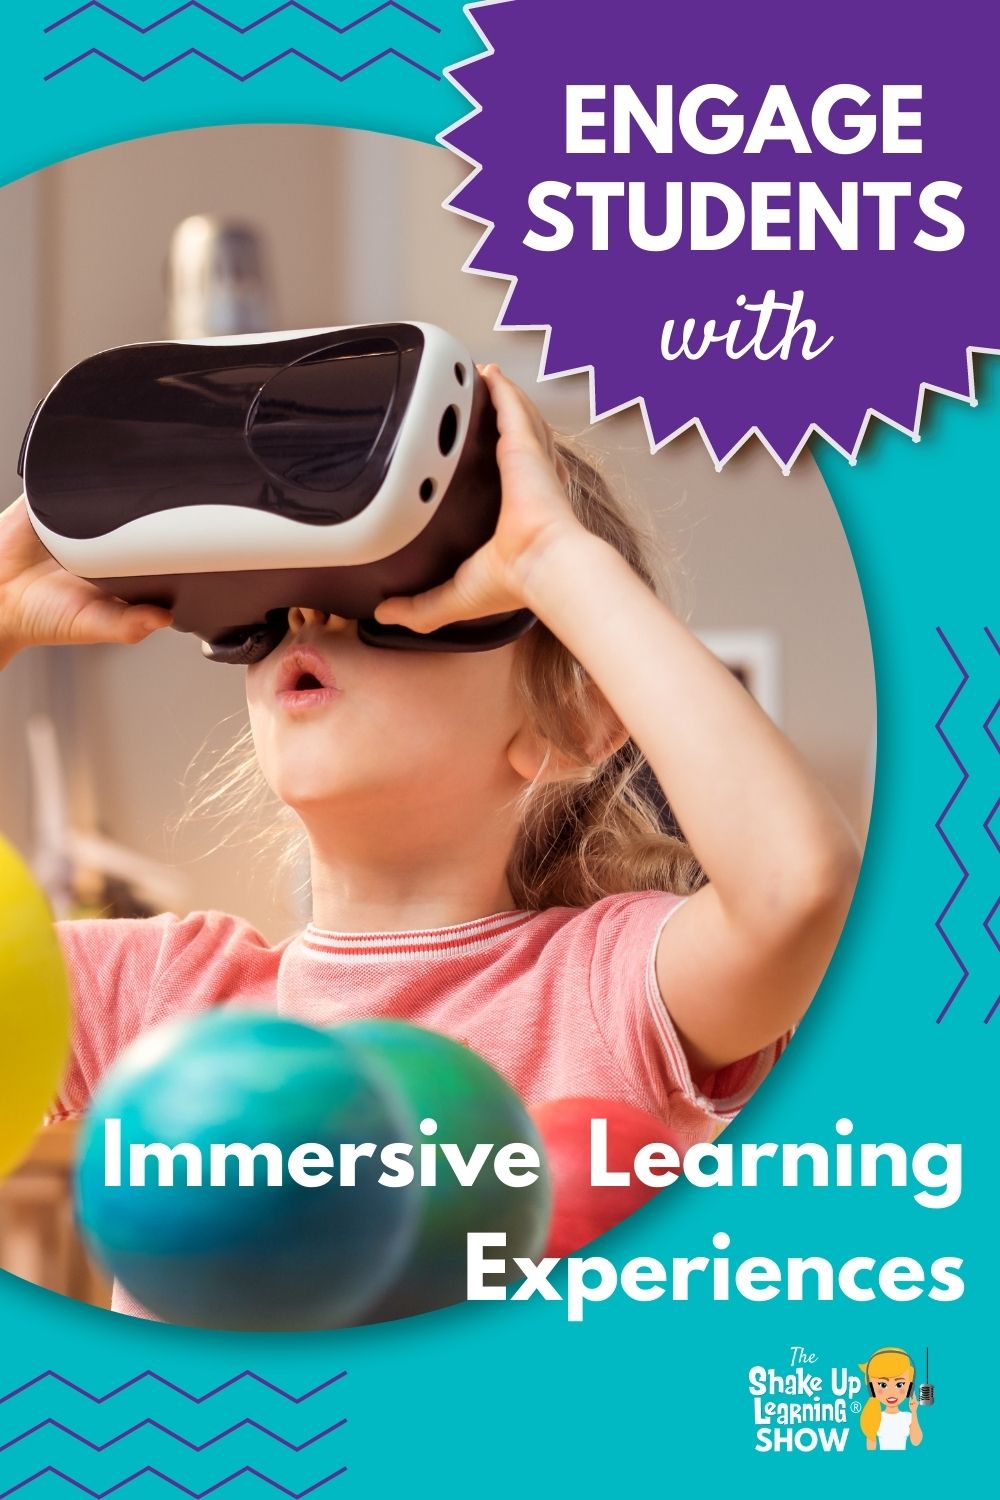 Engaging Students with Immersive Learning Experiences – SULS0159